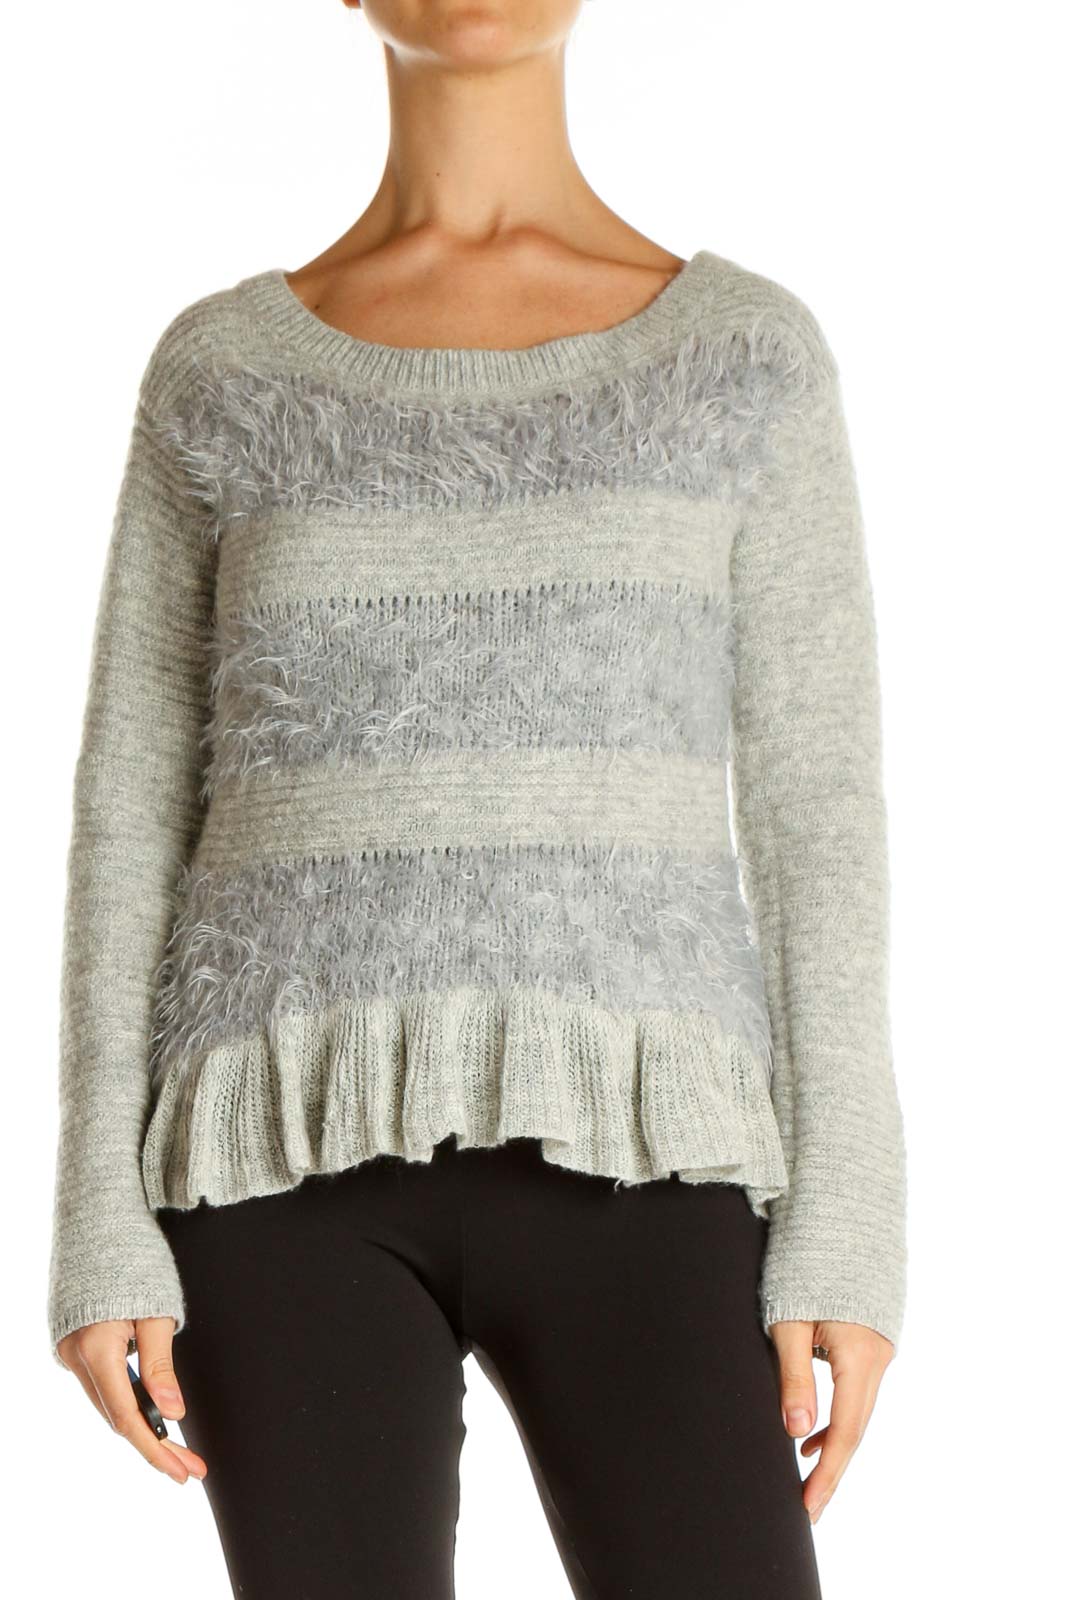 Gray Textured Chic Sweater Front